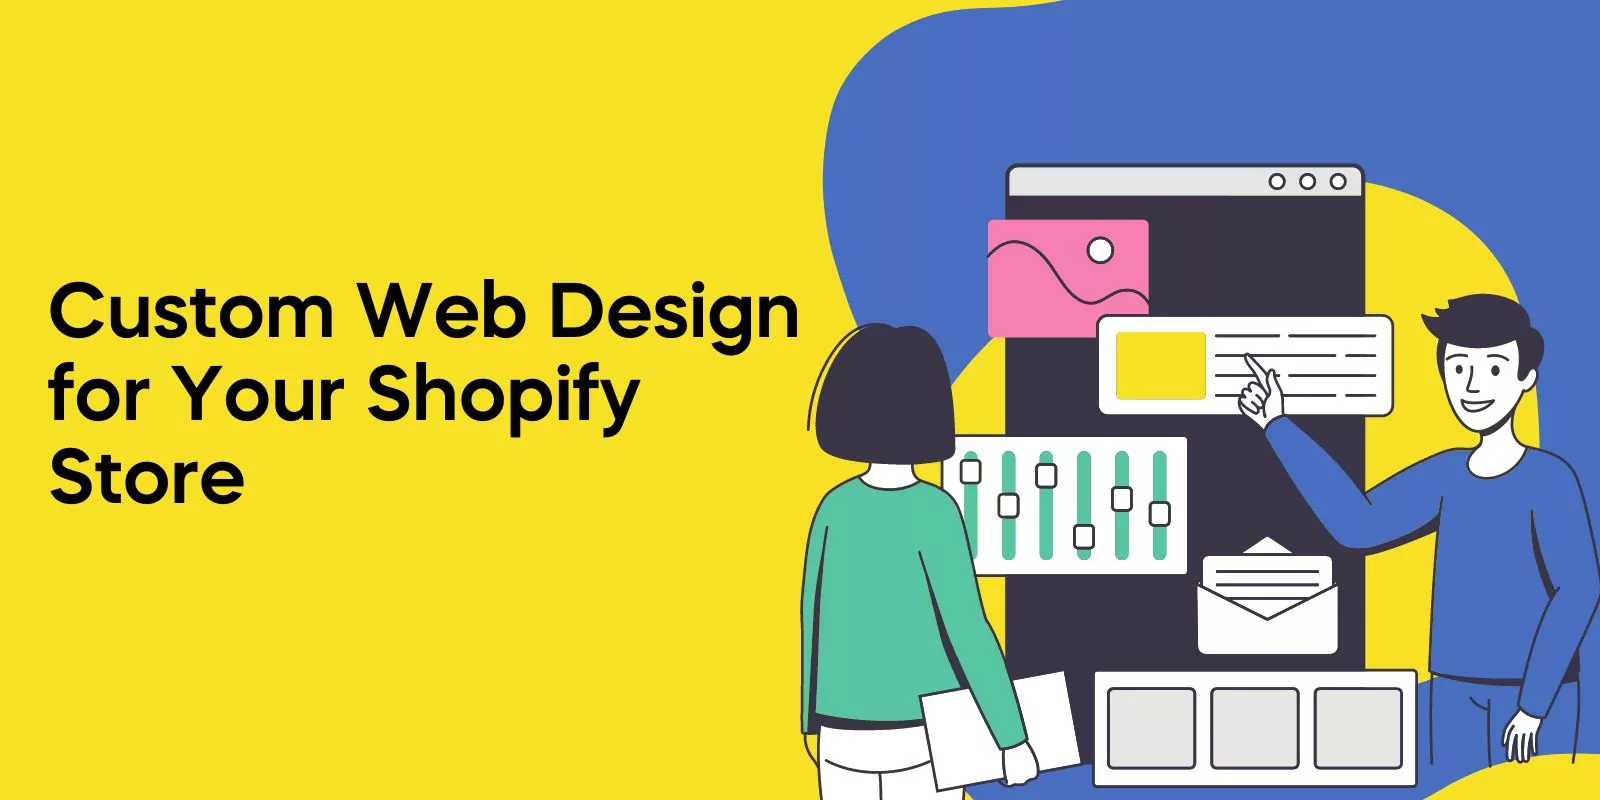 Custom Web Design for Your Shopify Store